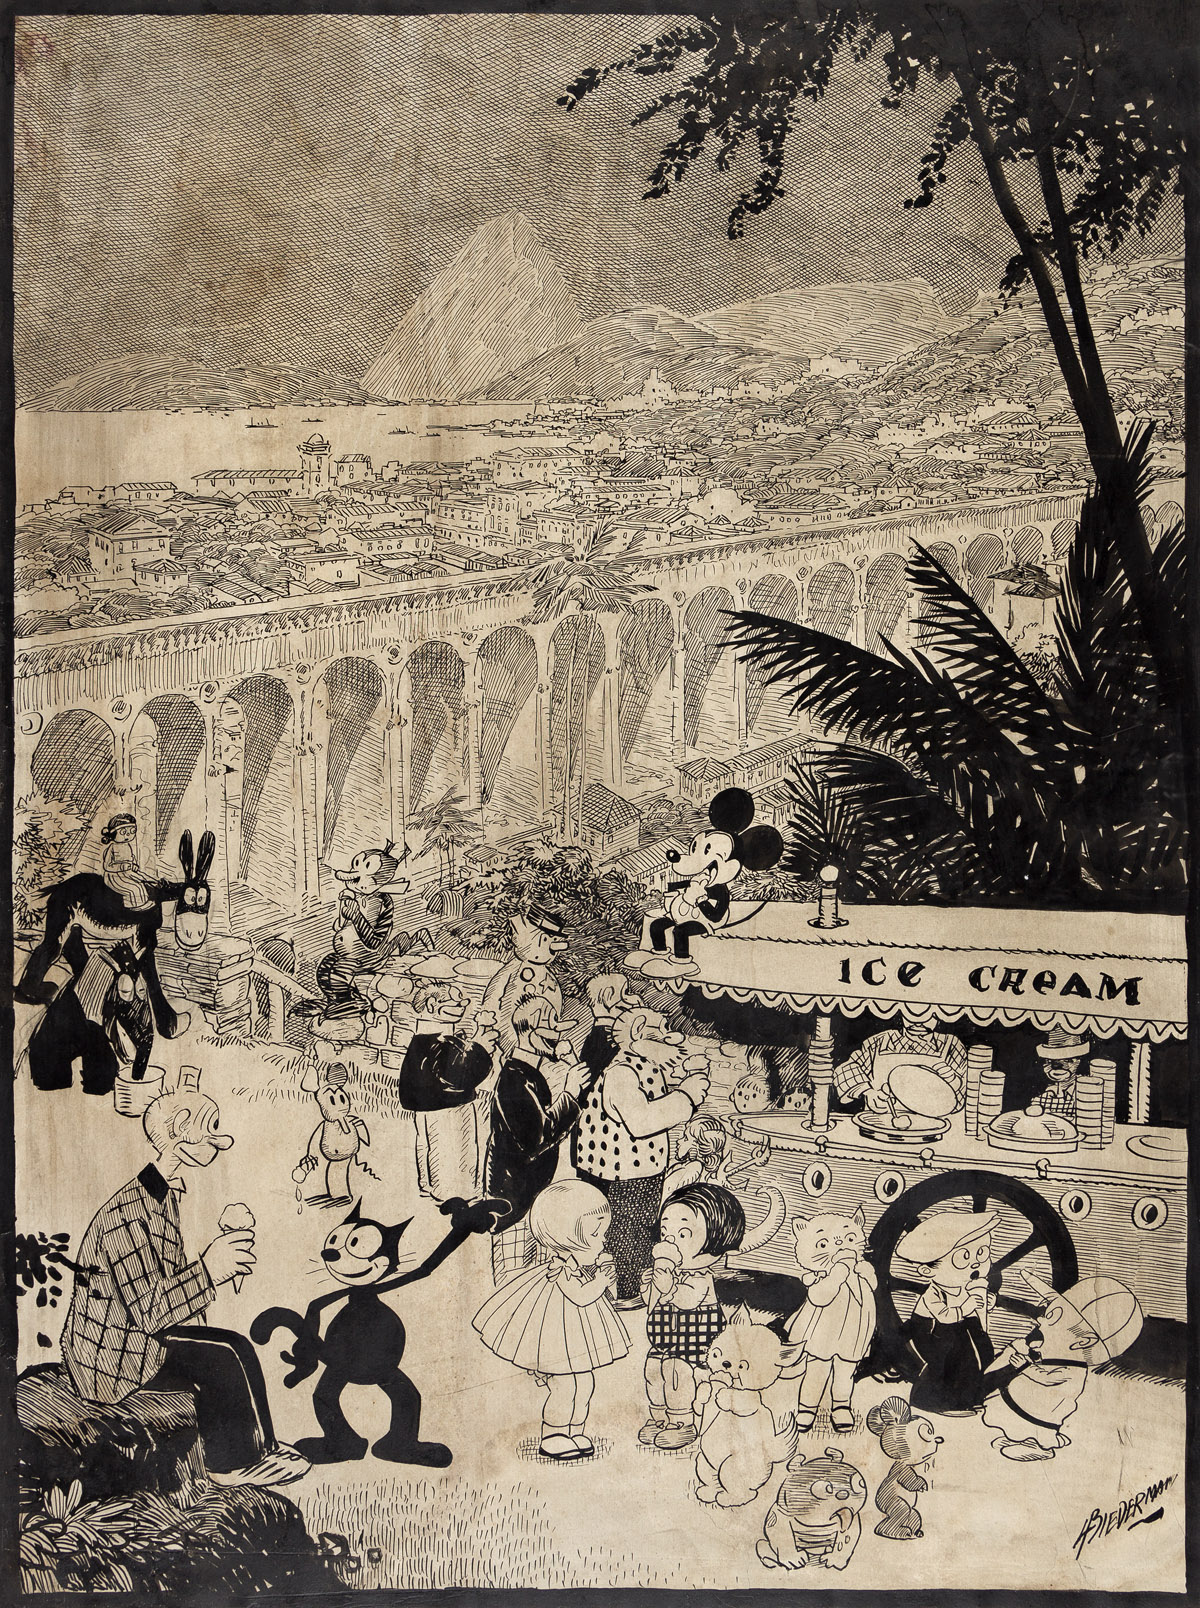 (DISNEY / KING FEATURES) LOUIS BIEDERMANN (1874-1957) Rio de Janeiro with Sugarloaf Mountain in the background.